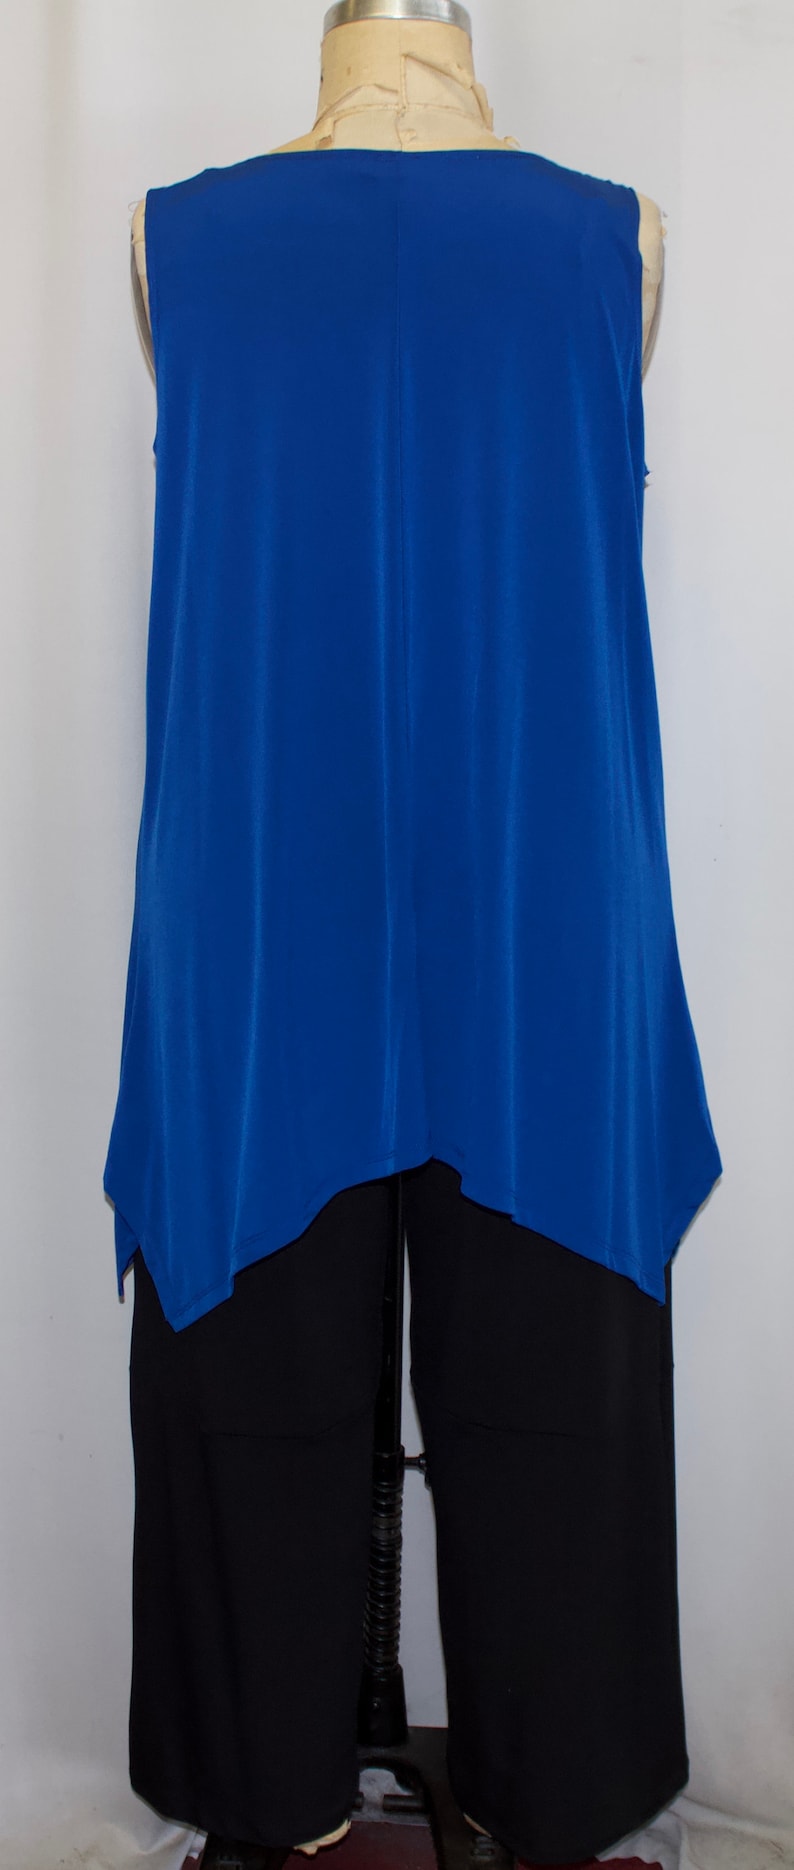 Plus Size Tank, Coco and Juan, Lagenlook, Plus Size Tunic, Sapphire Blue, Traveler Knit, Angled, Tank Top, Size 2 Fits 3X,4X Bust to 60 image 4